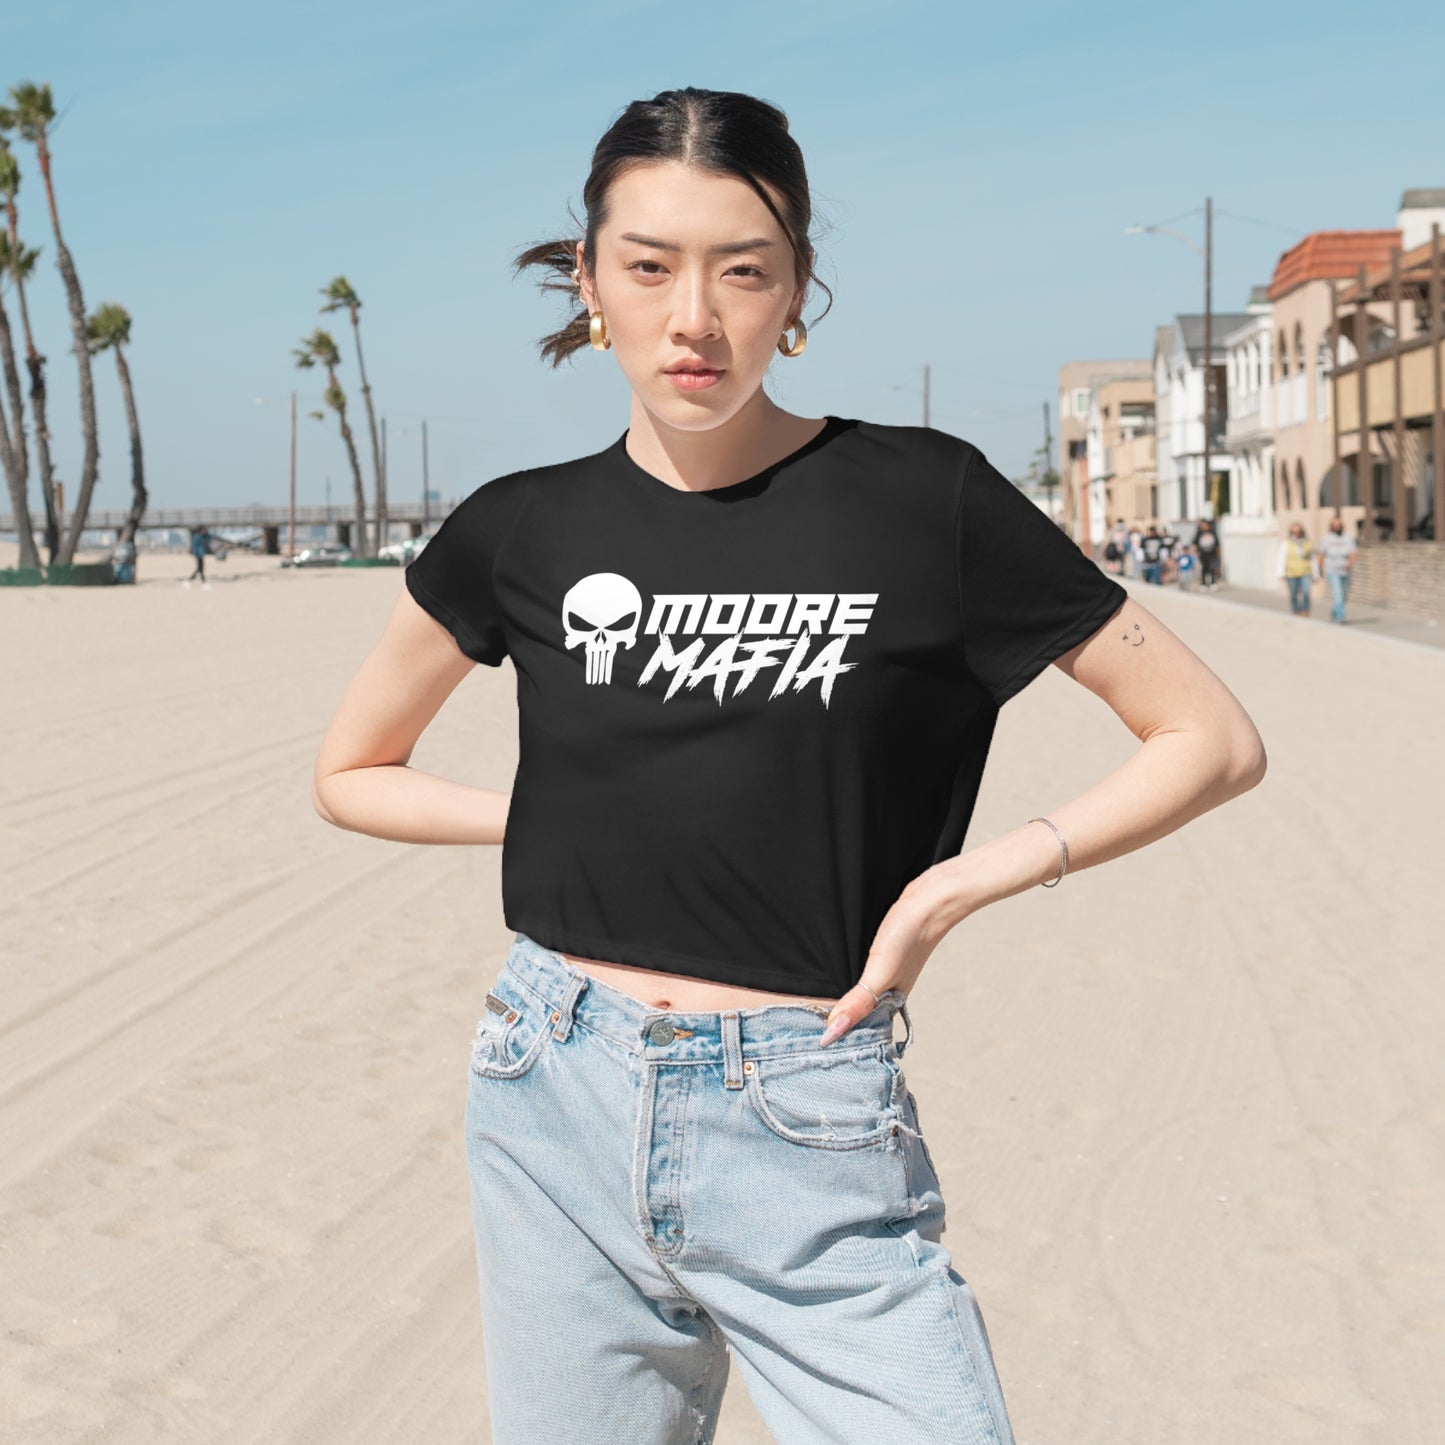 Motorcycles Are Like Strippers Women's Flowy Cropped Tee